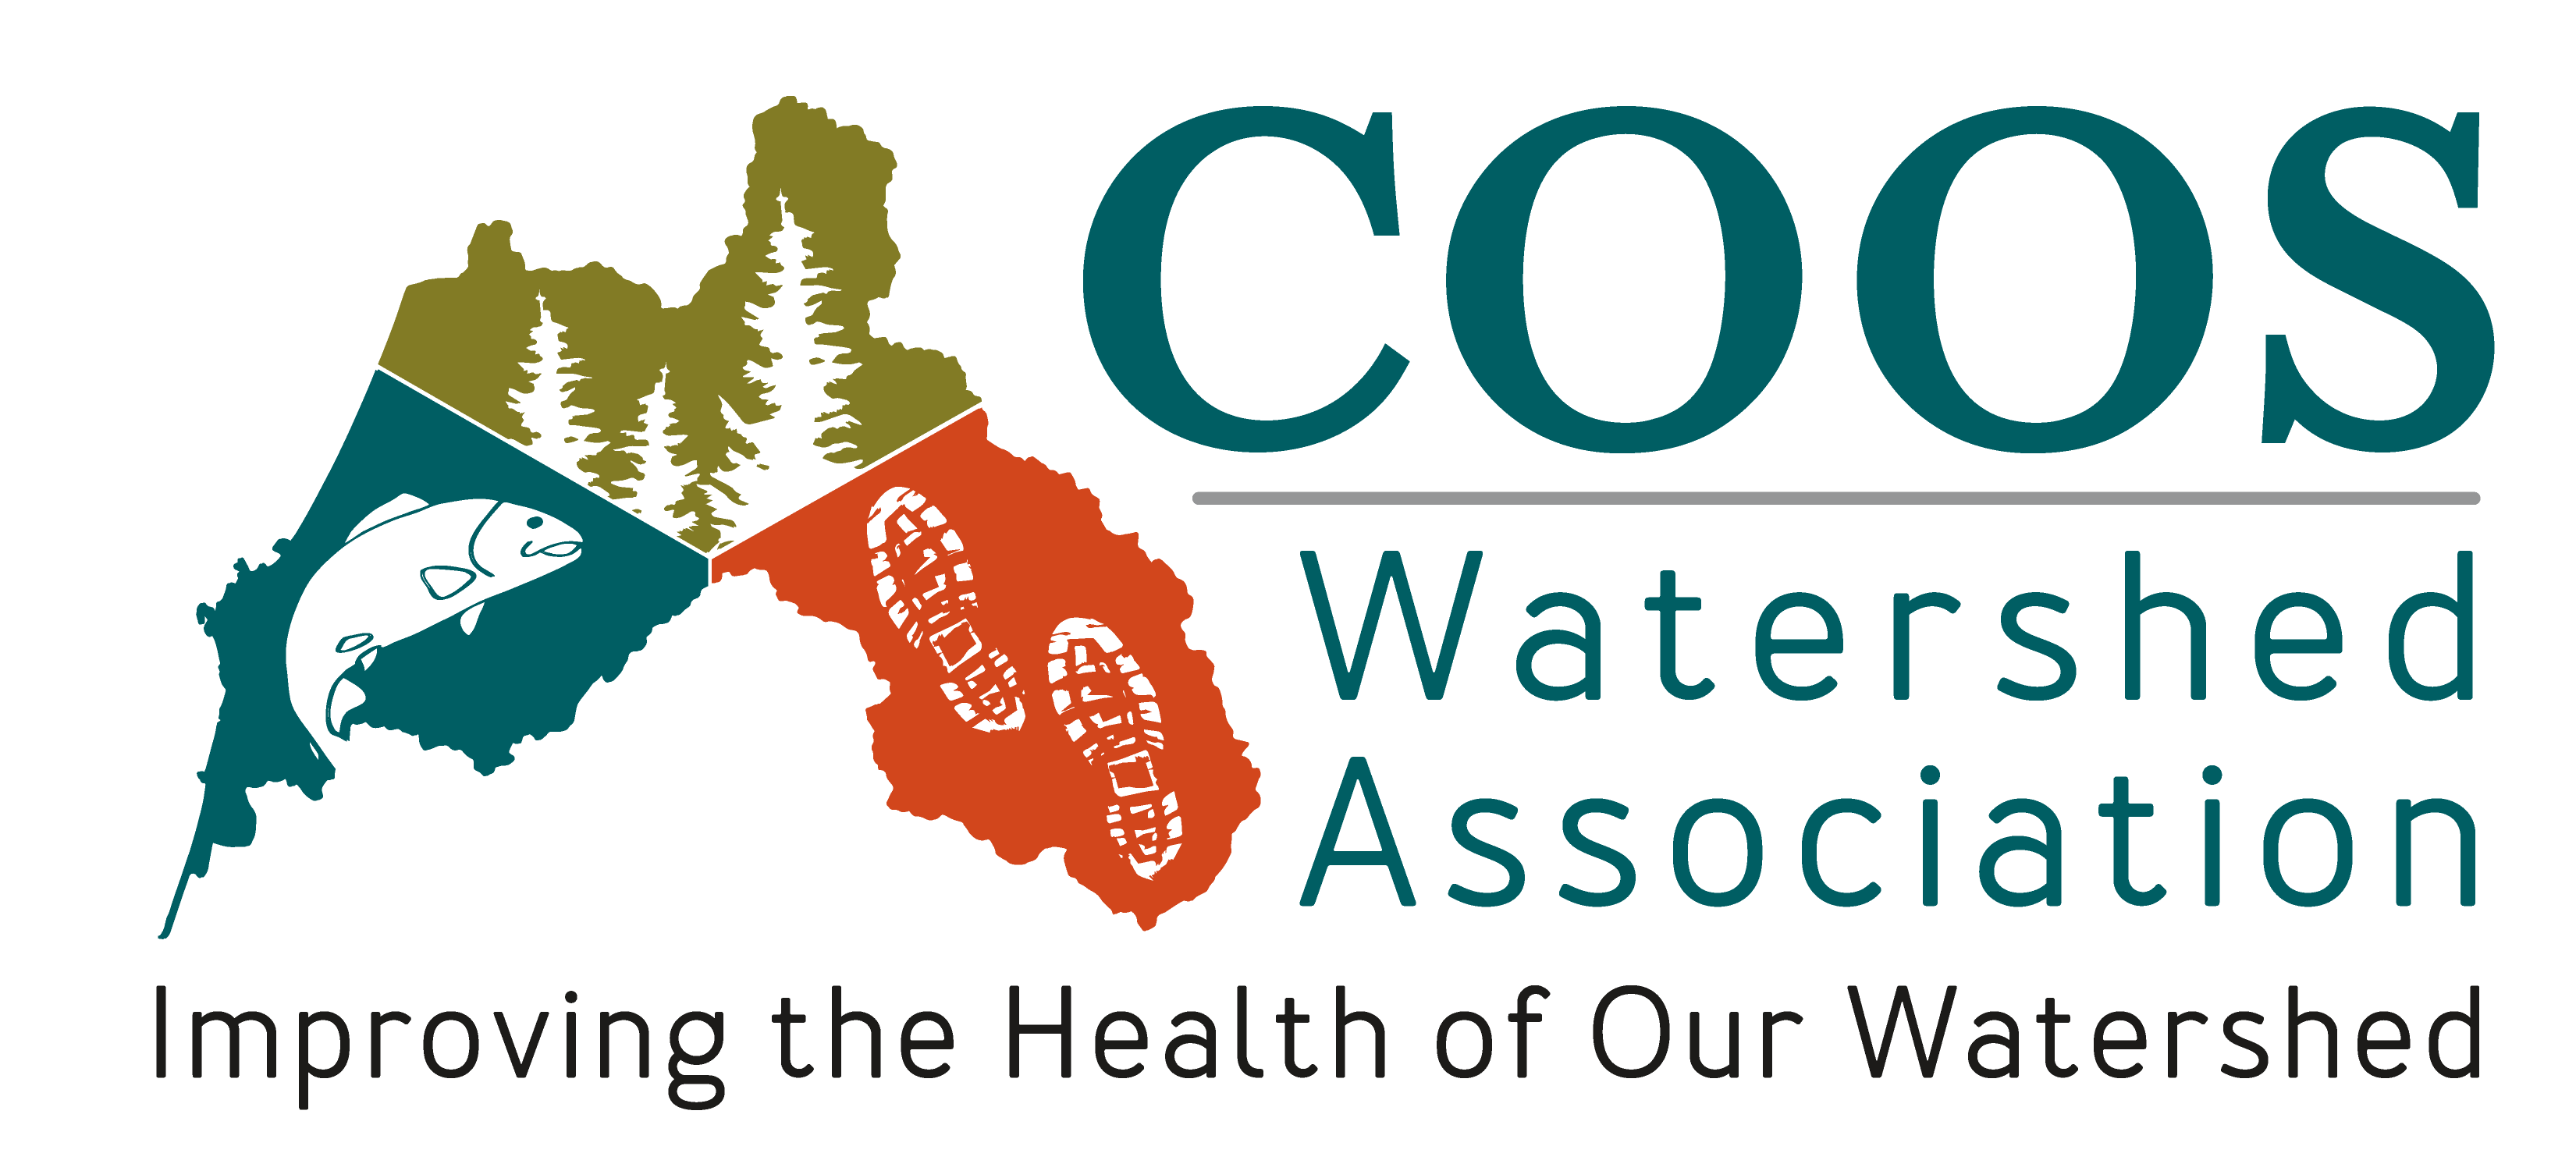 Coos Watershed Association